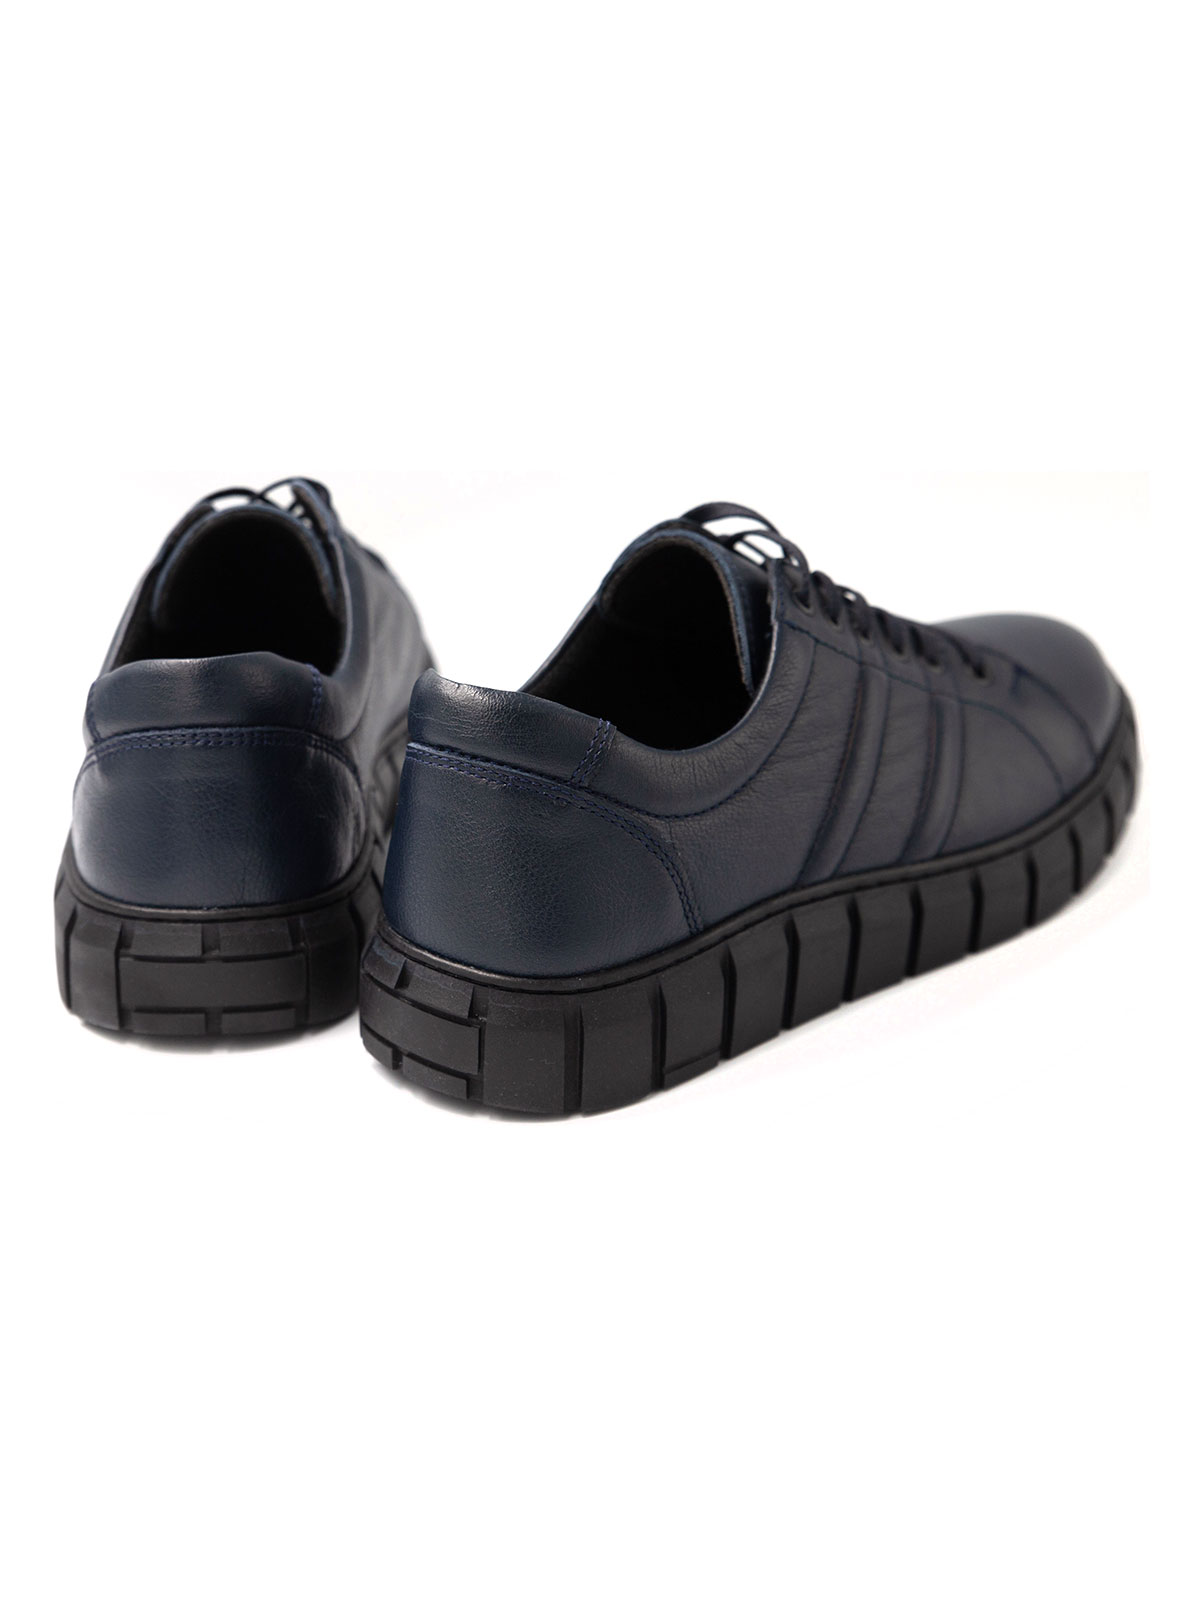 Dark blue sports leather shoes - 81098 - € 41.62 img4